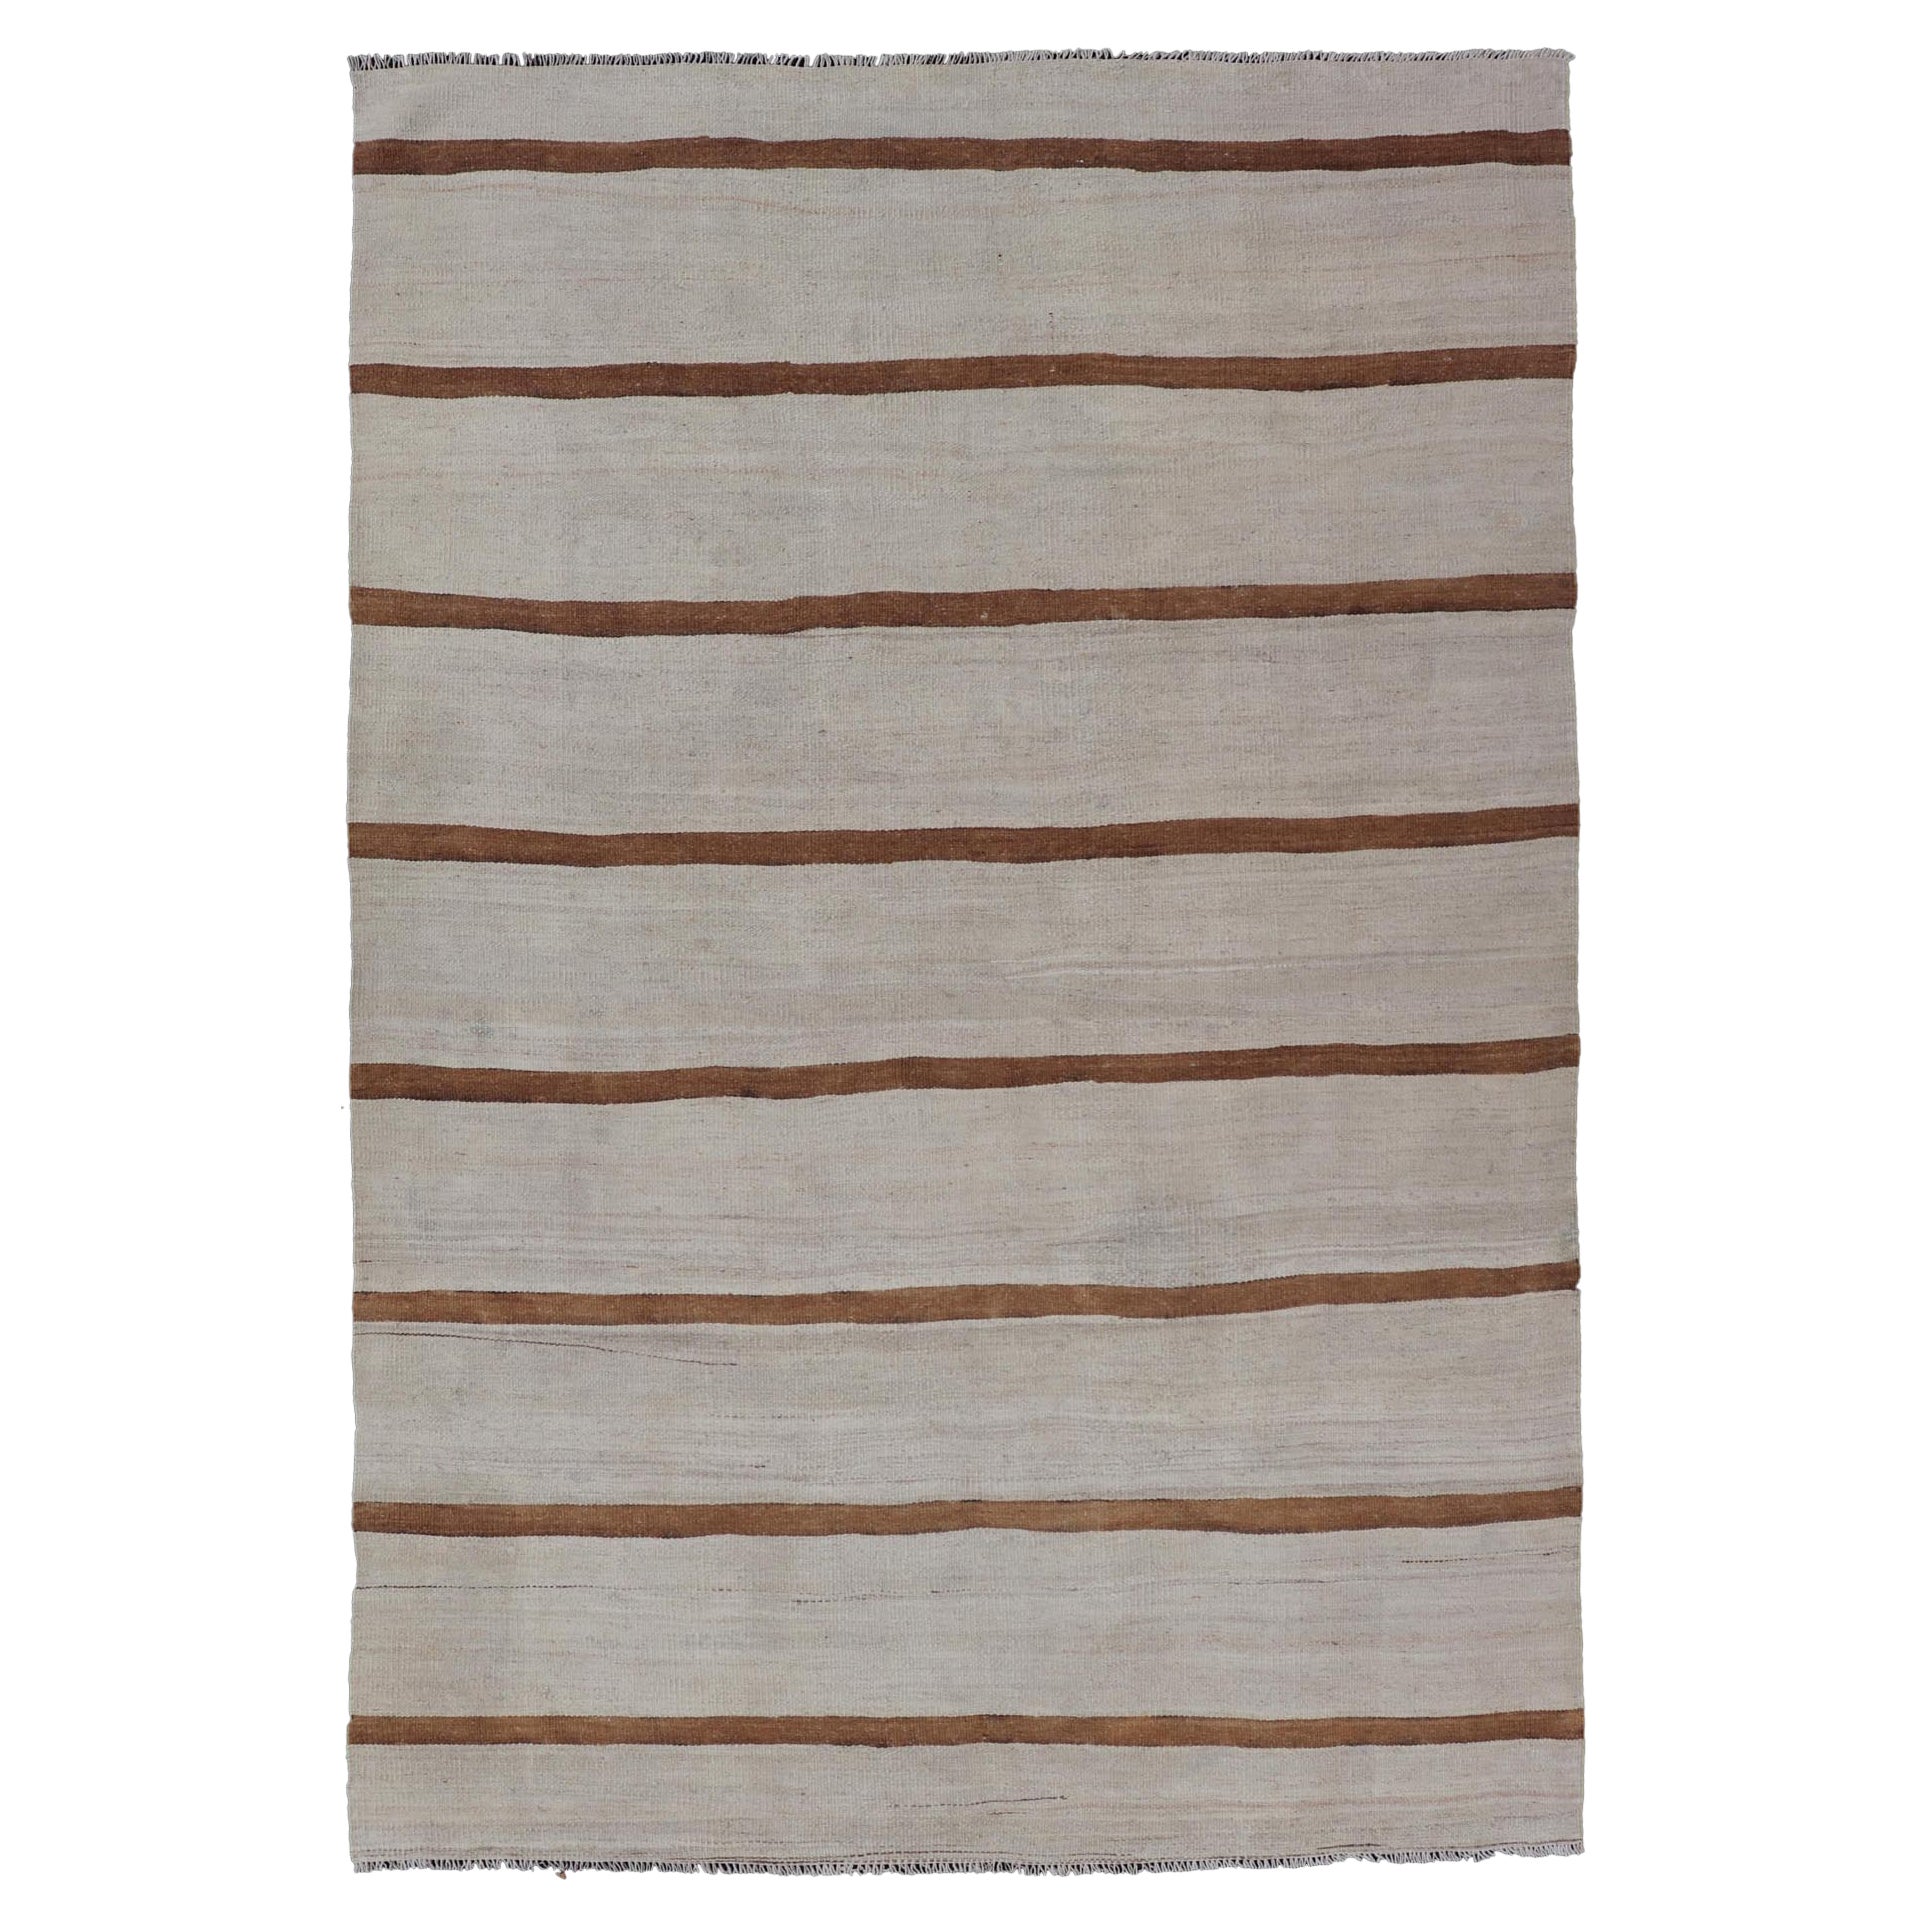 Vintage Turkish Flat-Weave Muted Colored Kilim in Ivory, Brown and Light Tan